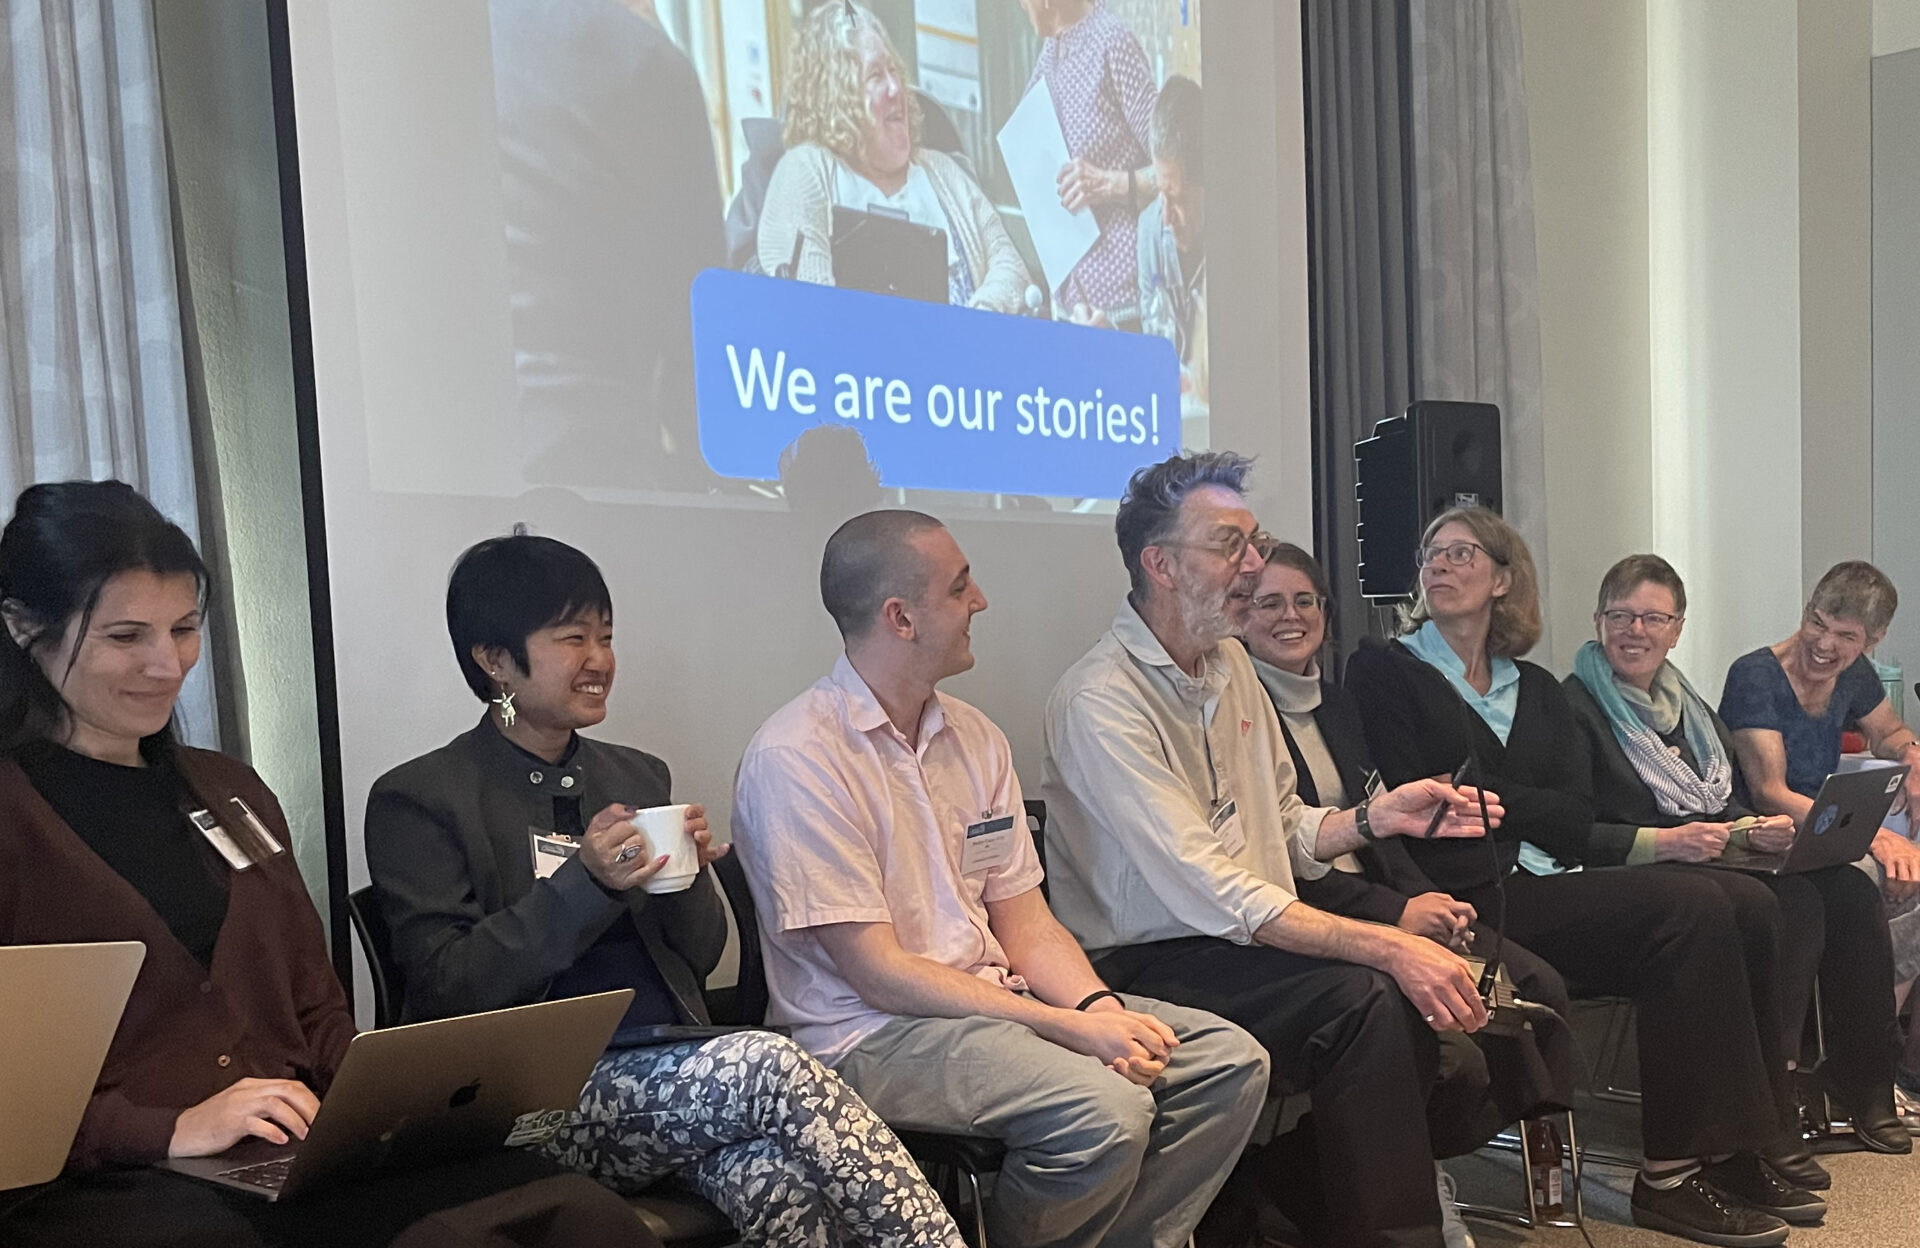 Participating speakers at a discussion panel, sitting next to each other, smiling and in conversation. Behind them is a projected image with the text “We are our stories!”. In the image, from left to right, is Seray Ibrahim (Kings College London), Rachel Chen (Nanyang Technological University, Singapore), Fin Tams-Gray (DJCAD, Dundee), Graham Pullin (DJCAD, Dundee), Stephanie Valencia (Carnegie Mellon University, Pittsburgh), Antonia Krummheuer (Aalborg University), Jutta Treviranus (OCAD, Toronto), and Annalu Waller (University of Dundee).